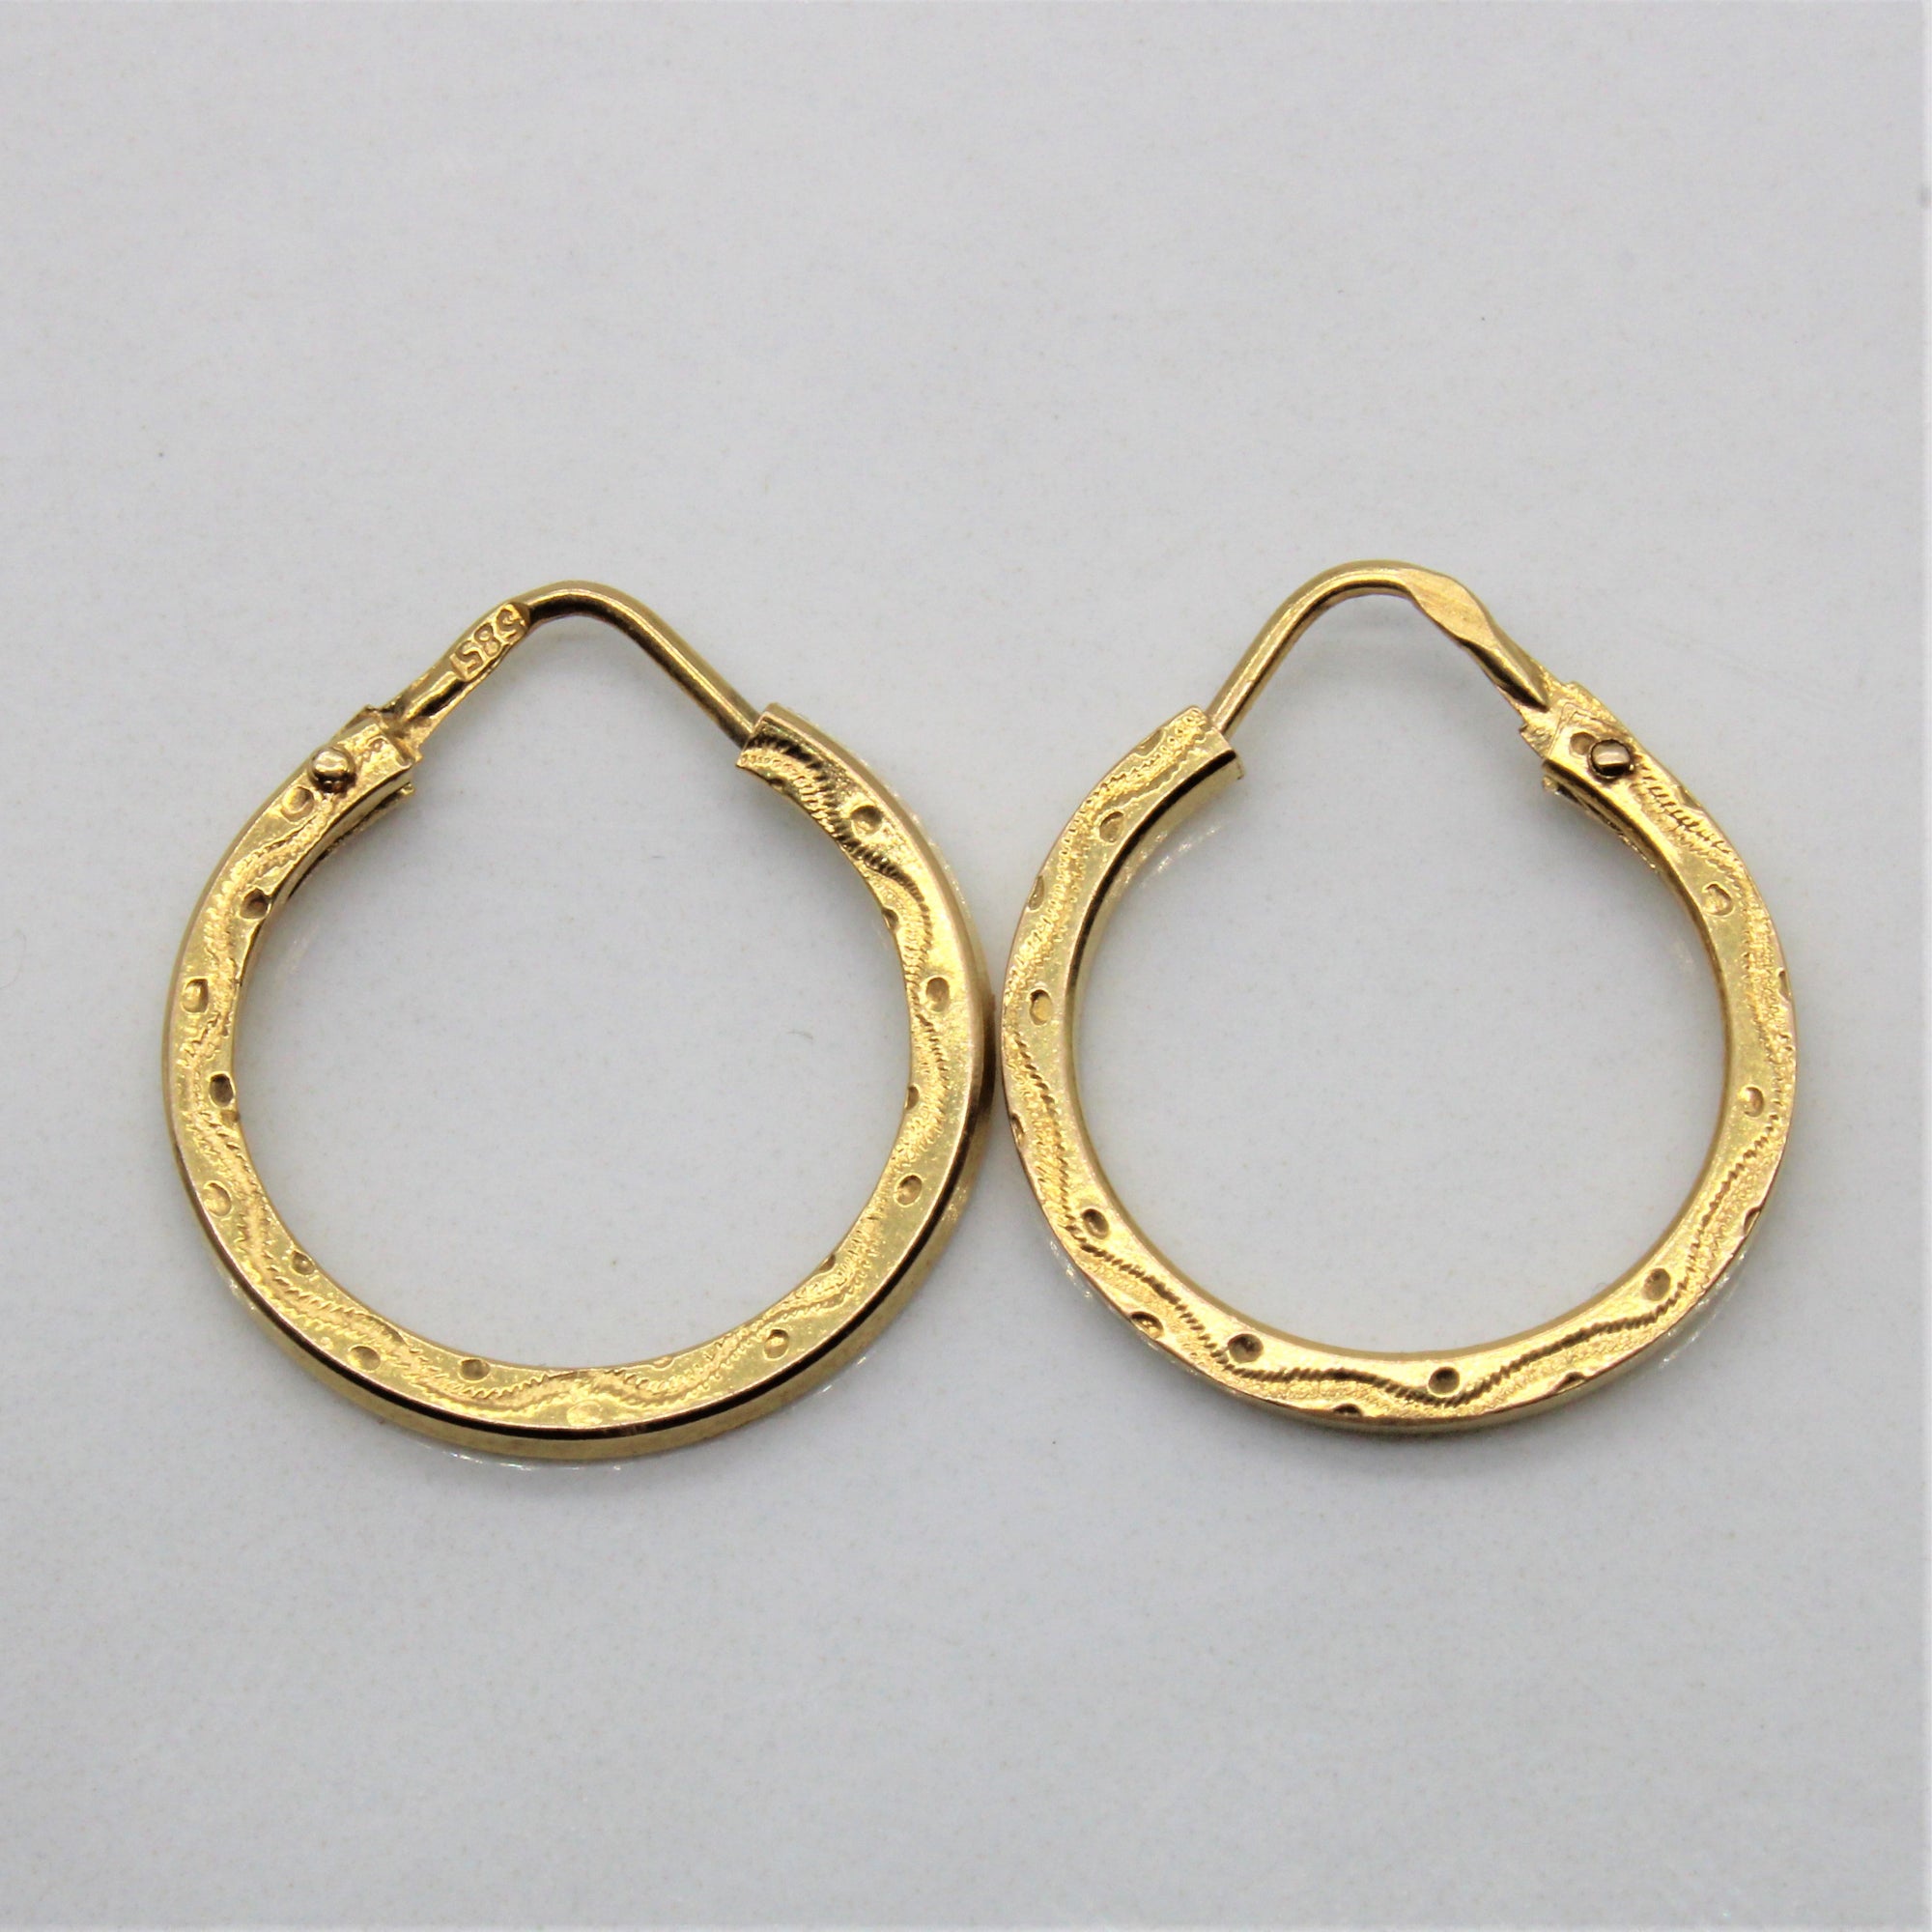 Patterned Yellow Gold Hoops |